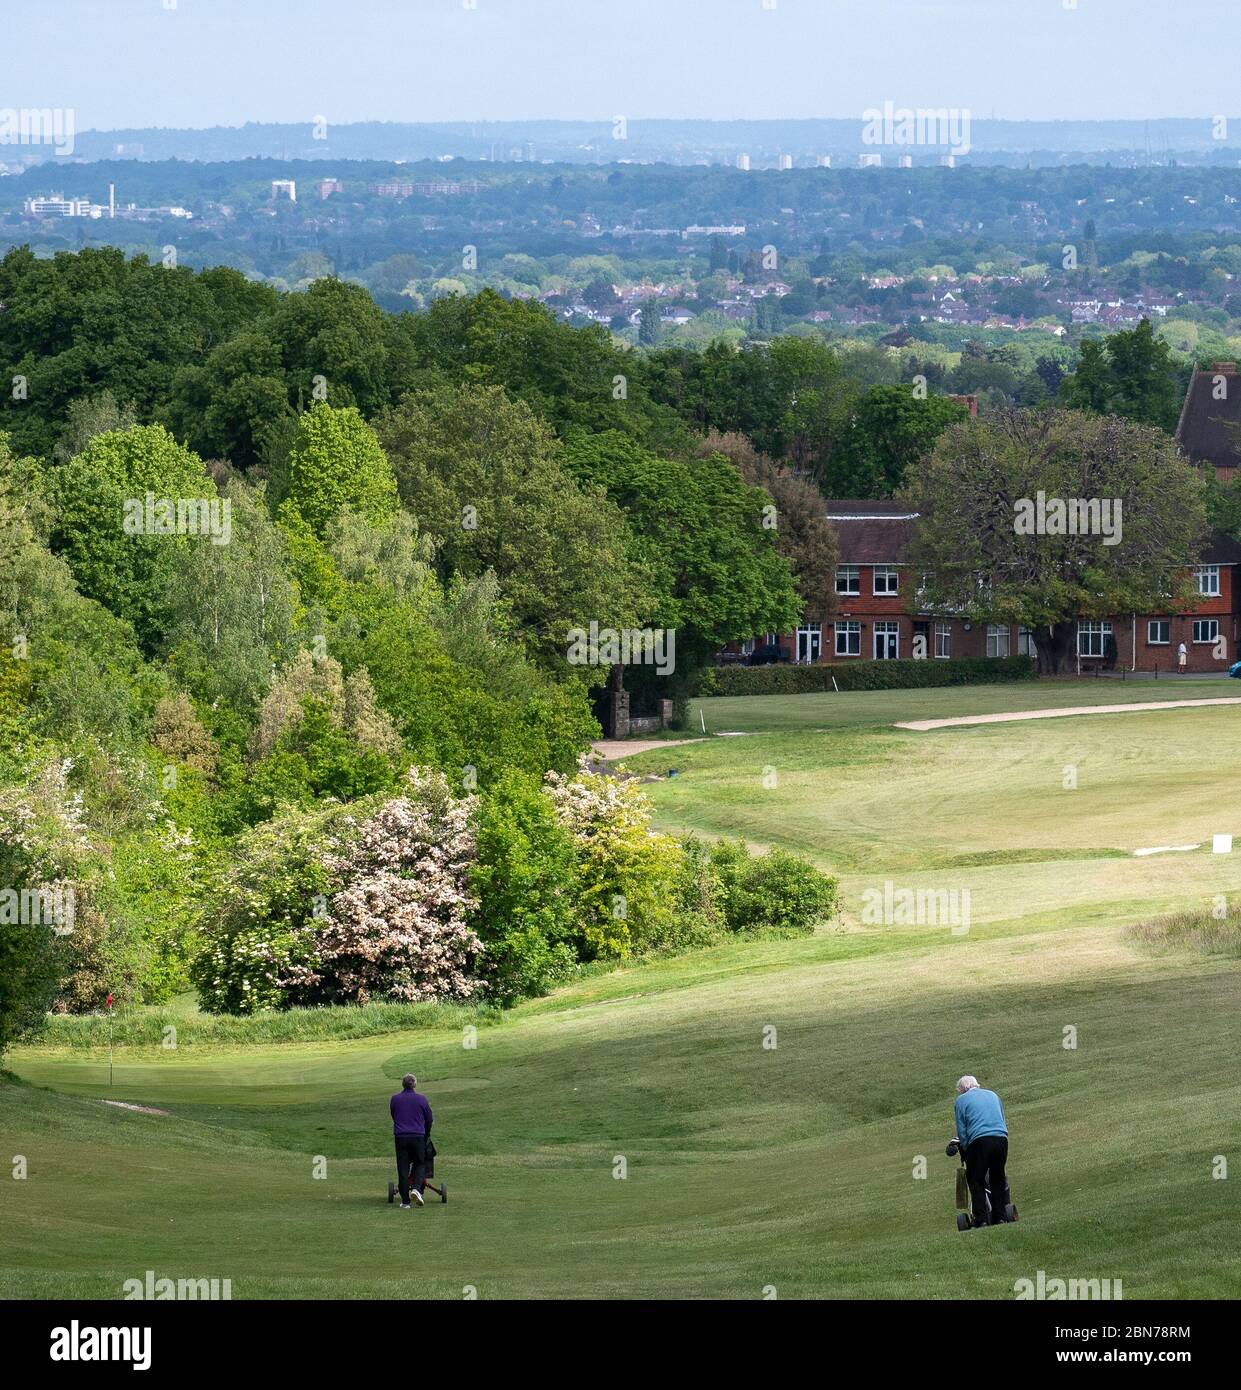 Golfers play at Epsom Downs Golf Club on the first morning after  restrictions are lifted at Epsom Downs, Epsom, Surrey Picture by Nigel  Bramley 078278 Stock Photo - Alamy